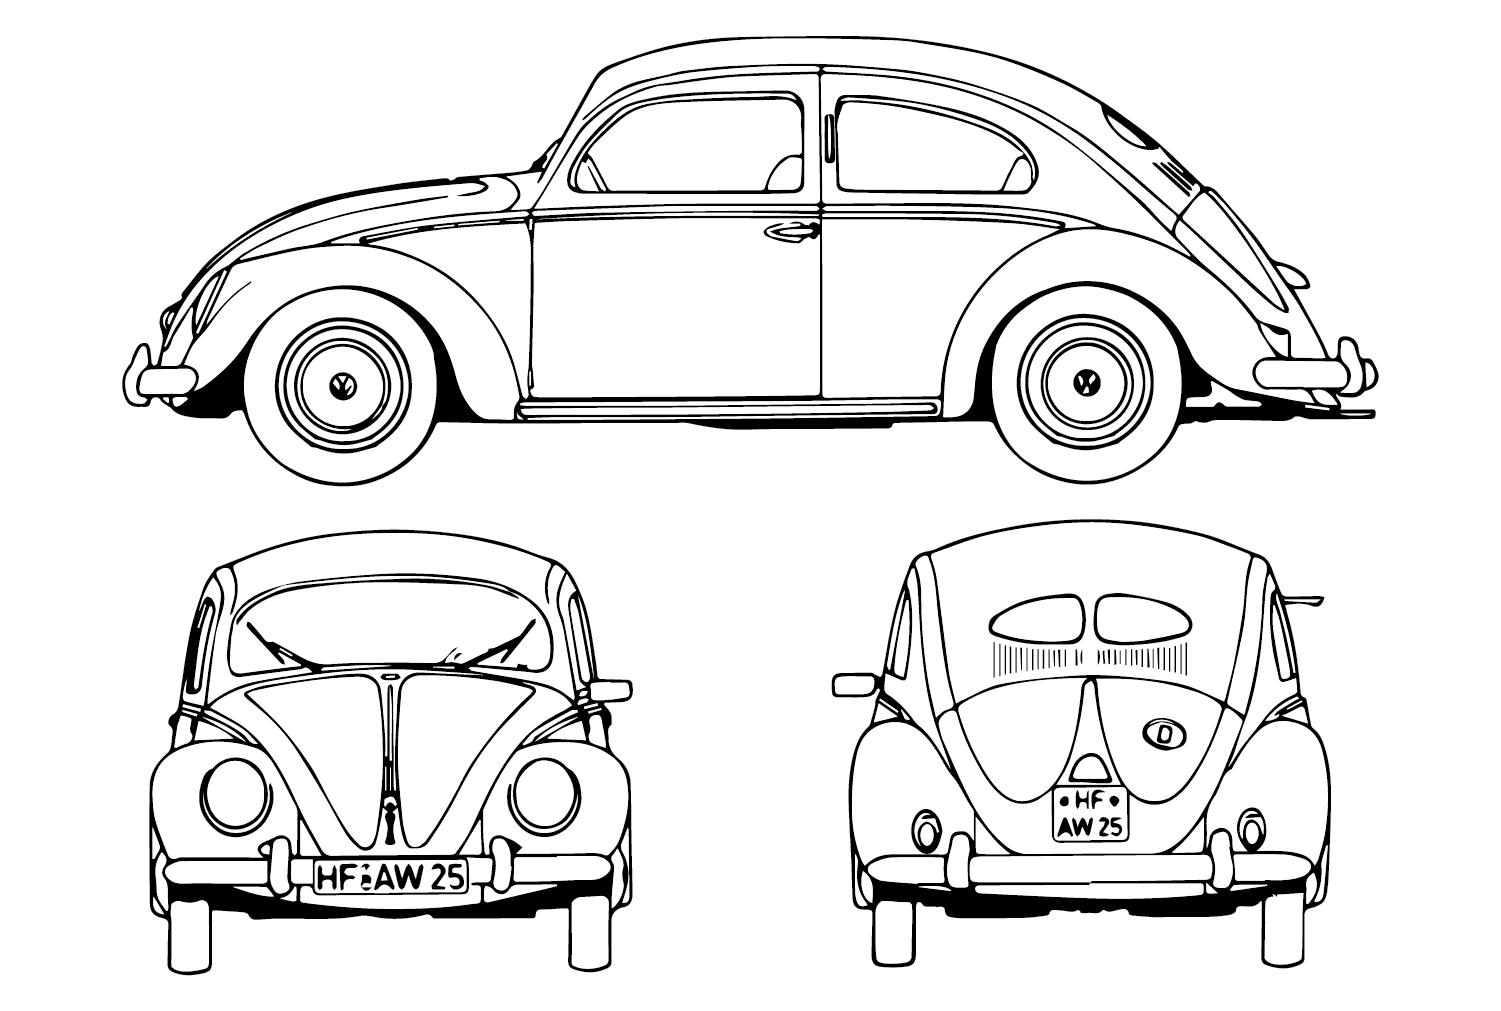 Volkswagen Beetle 1952 Coloring Page - Free Printable Coloring Pages